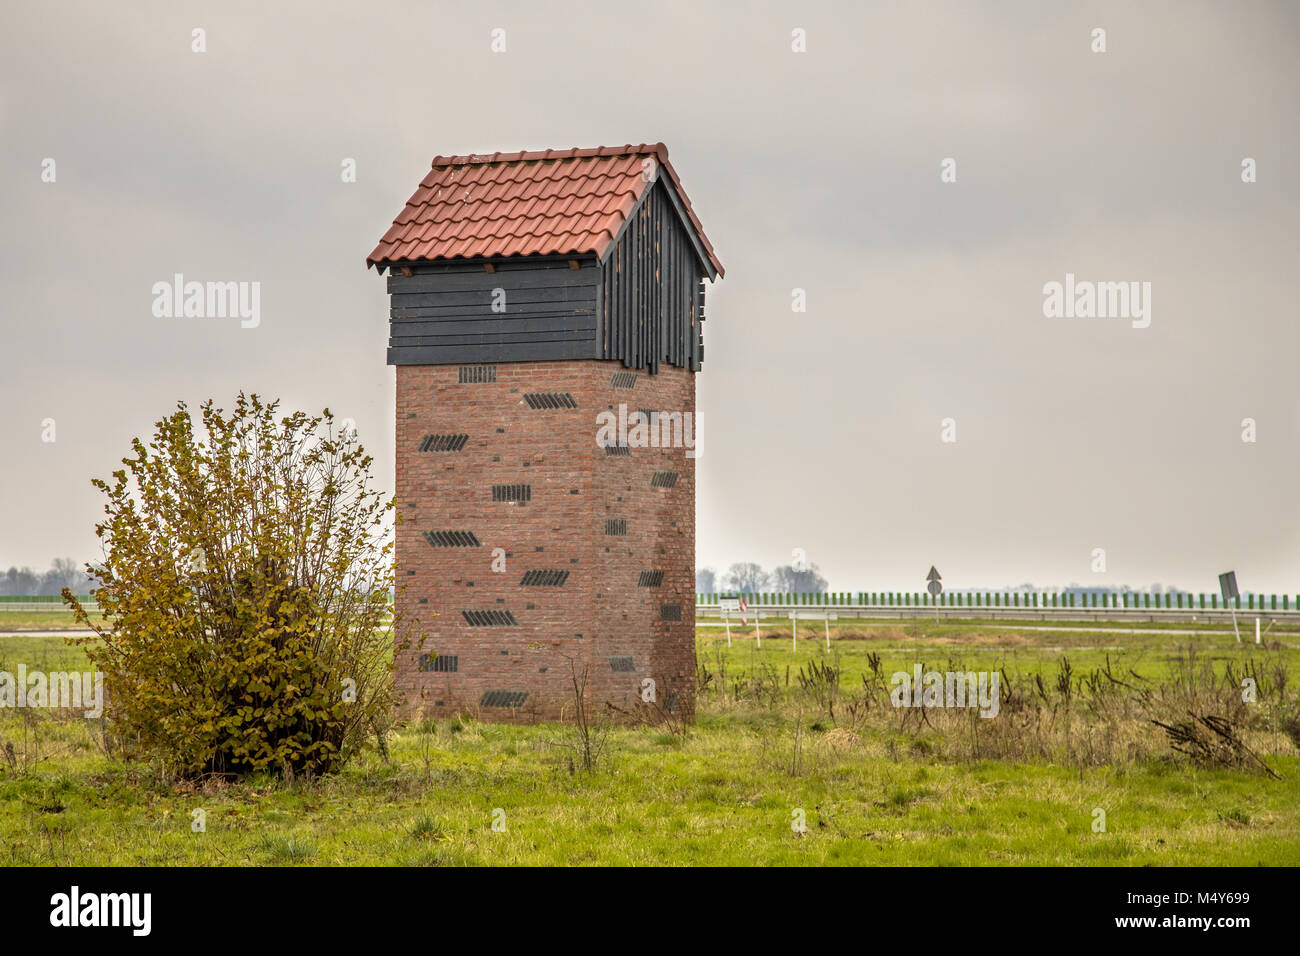 EEMSHAVEN,NETHERLANDS - NOVEMBER 22, 2017: Bat house tower for protection and housing of pipistrelle bats in the Netherlands Stock Photo